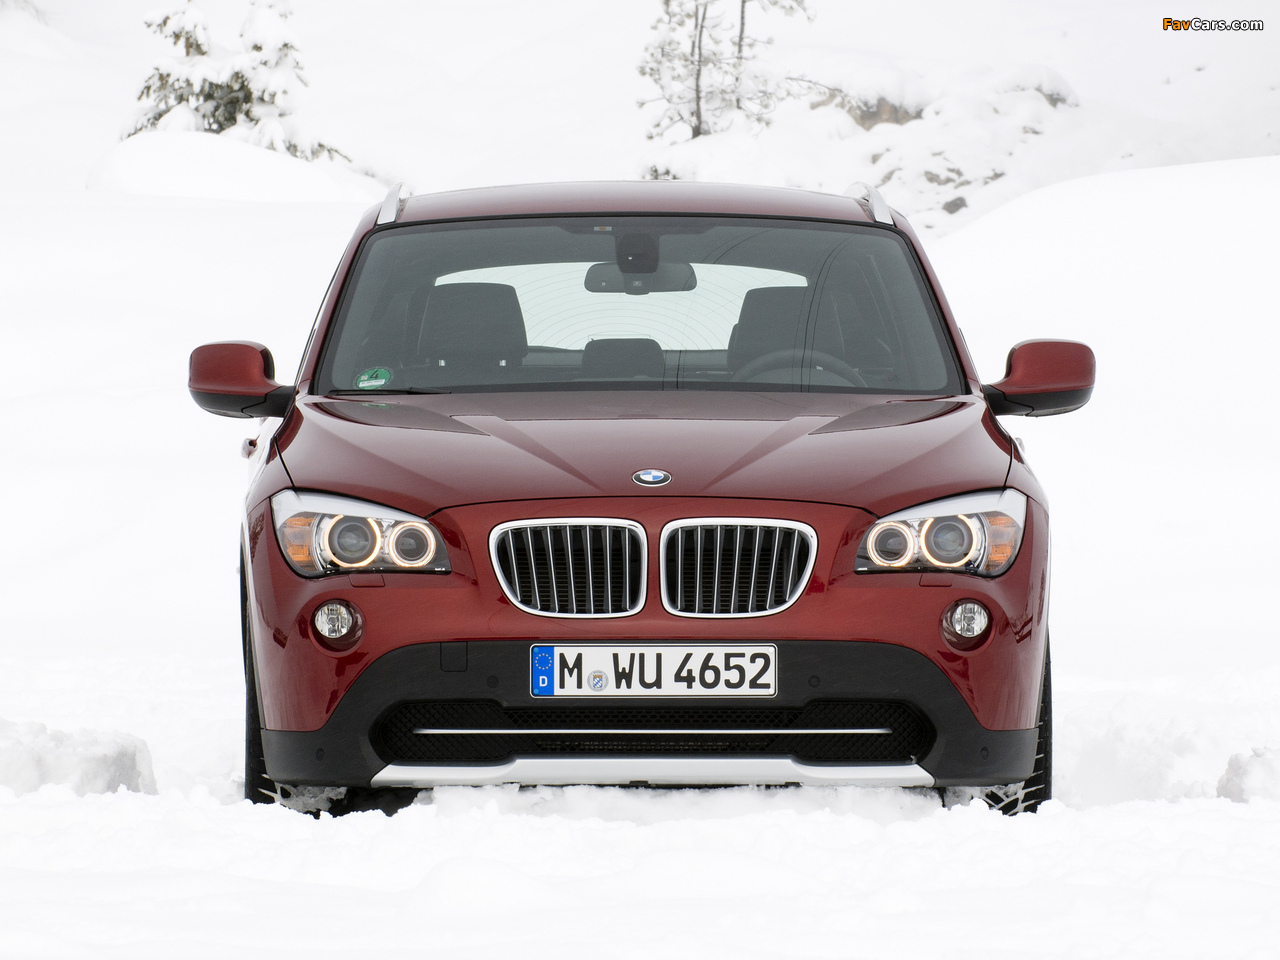 BMW X1 xDrive28i (E84) 2011 pictures (1280 x 960)